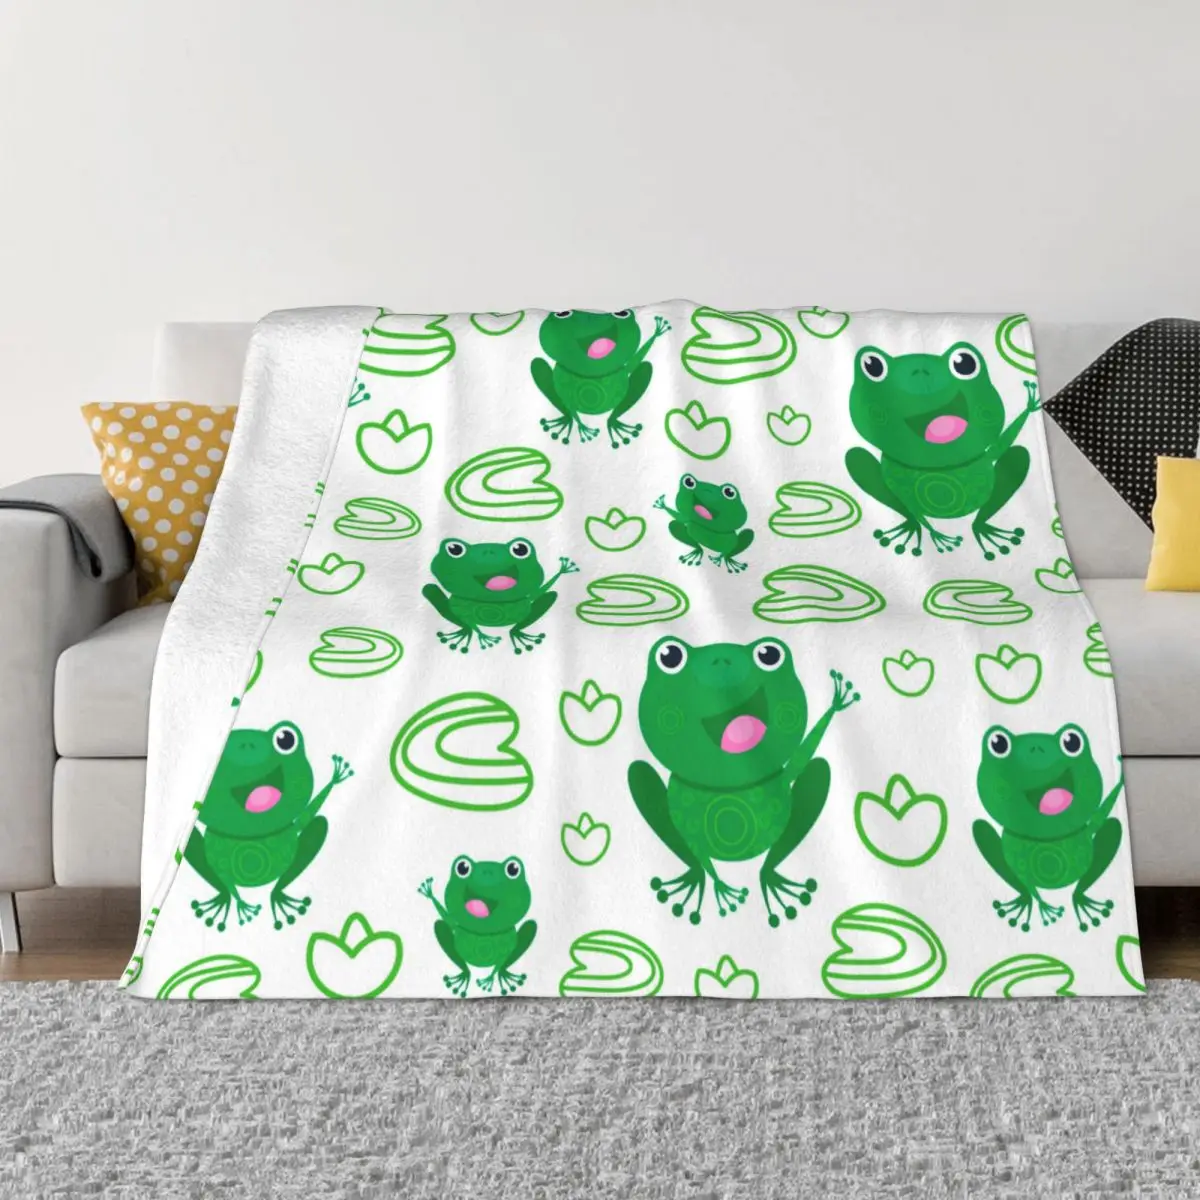 

Cute Frog Animal Blankets Flannel Frogs Cartoon Super Warm Throw Blankets for Bedding Couch Bedroom Quilt